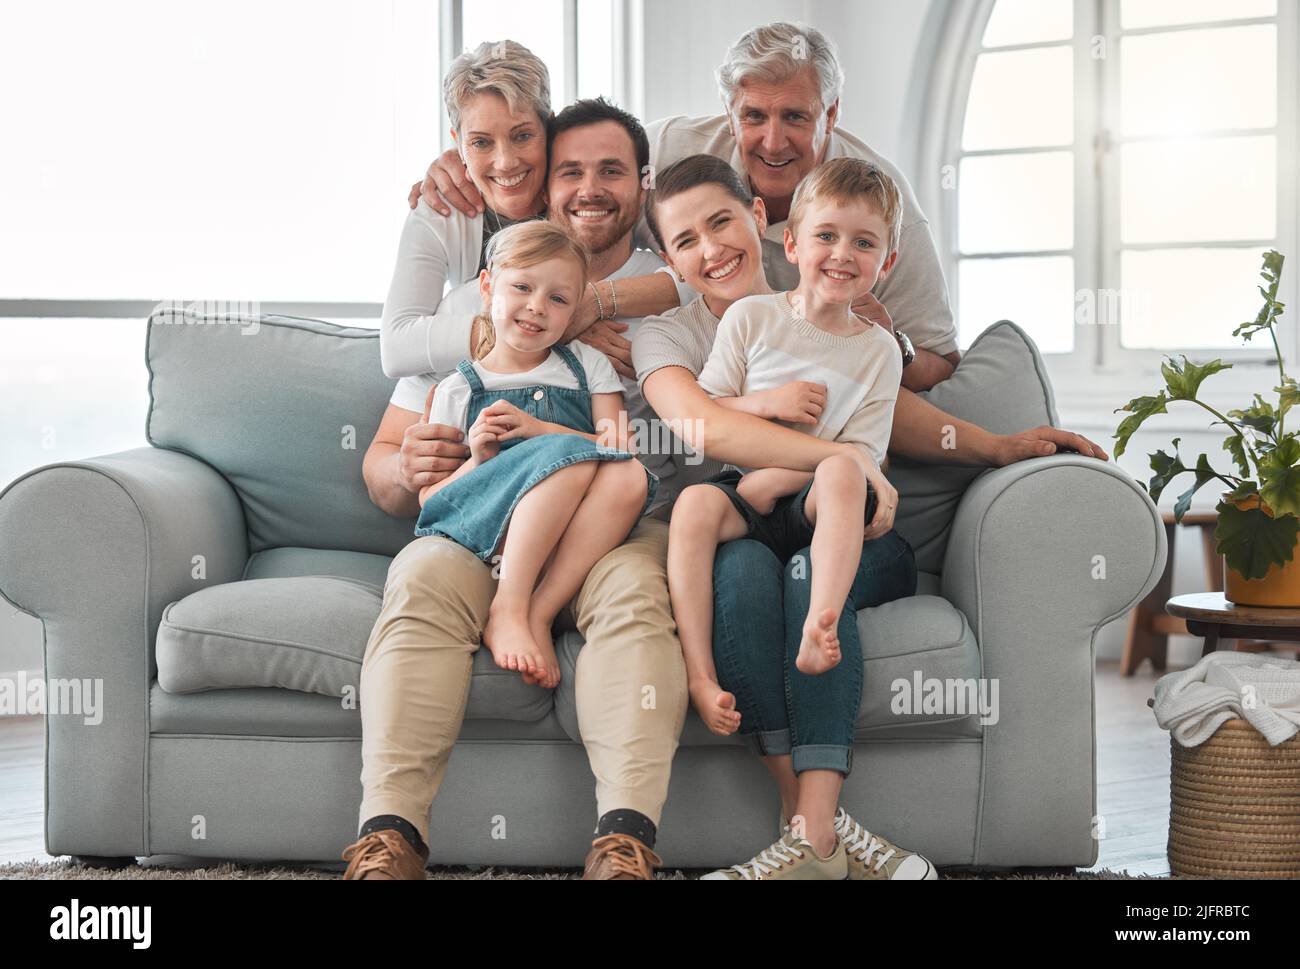 Live your life with love. Shot of a happy family relaxing on the sofa at home. Stock Photo